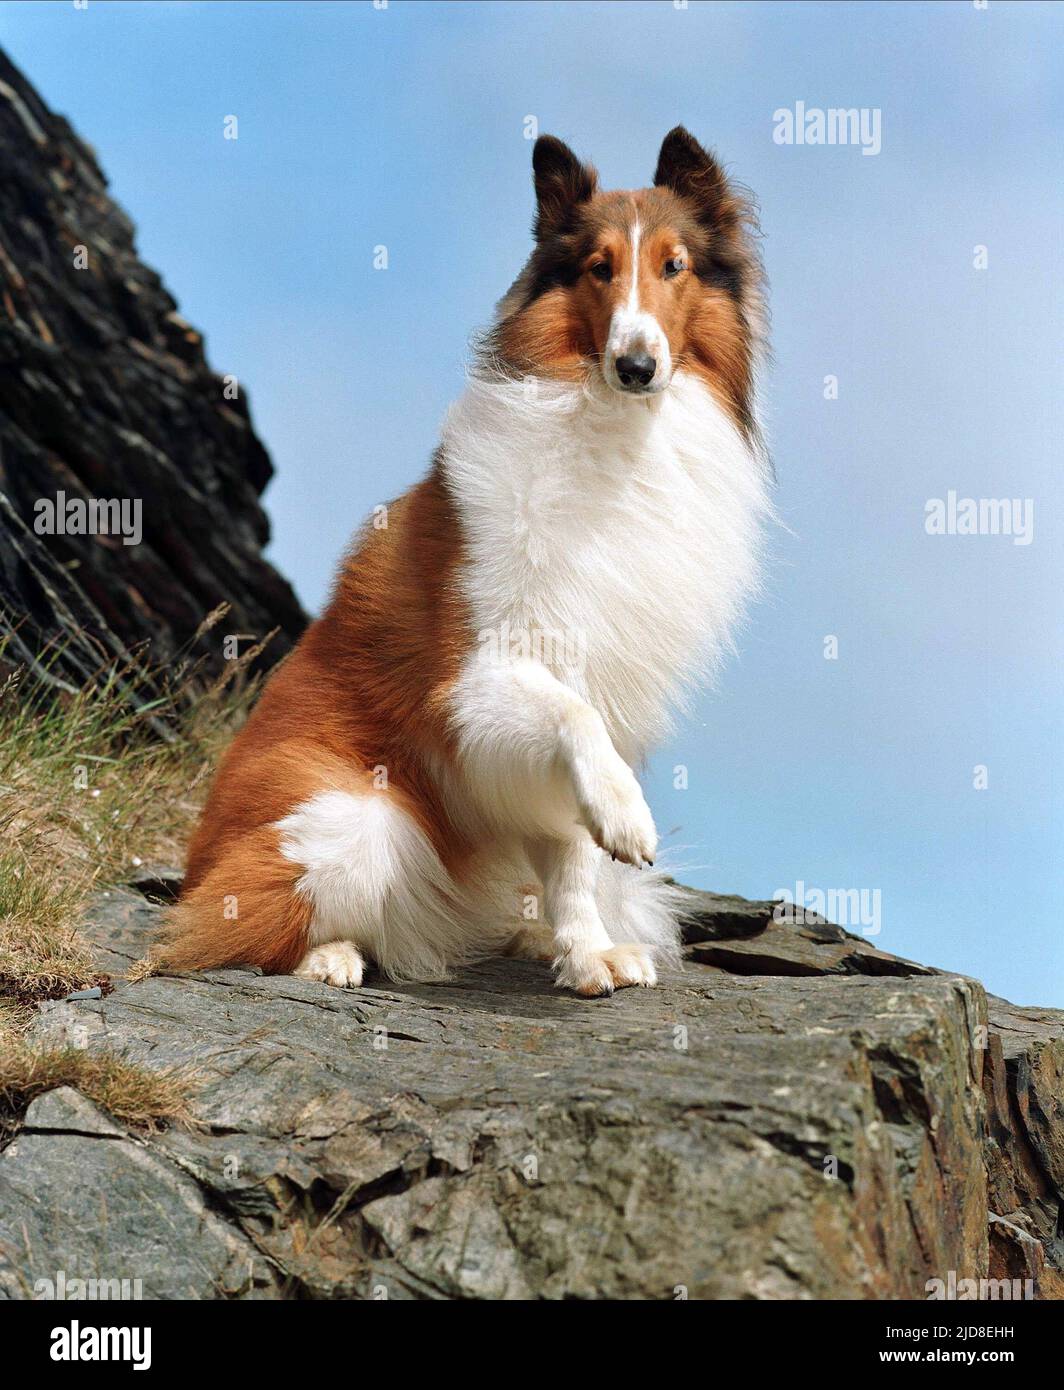 Lassie famous rough collie movie star dog poses in woodland 8x10 inch photo